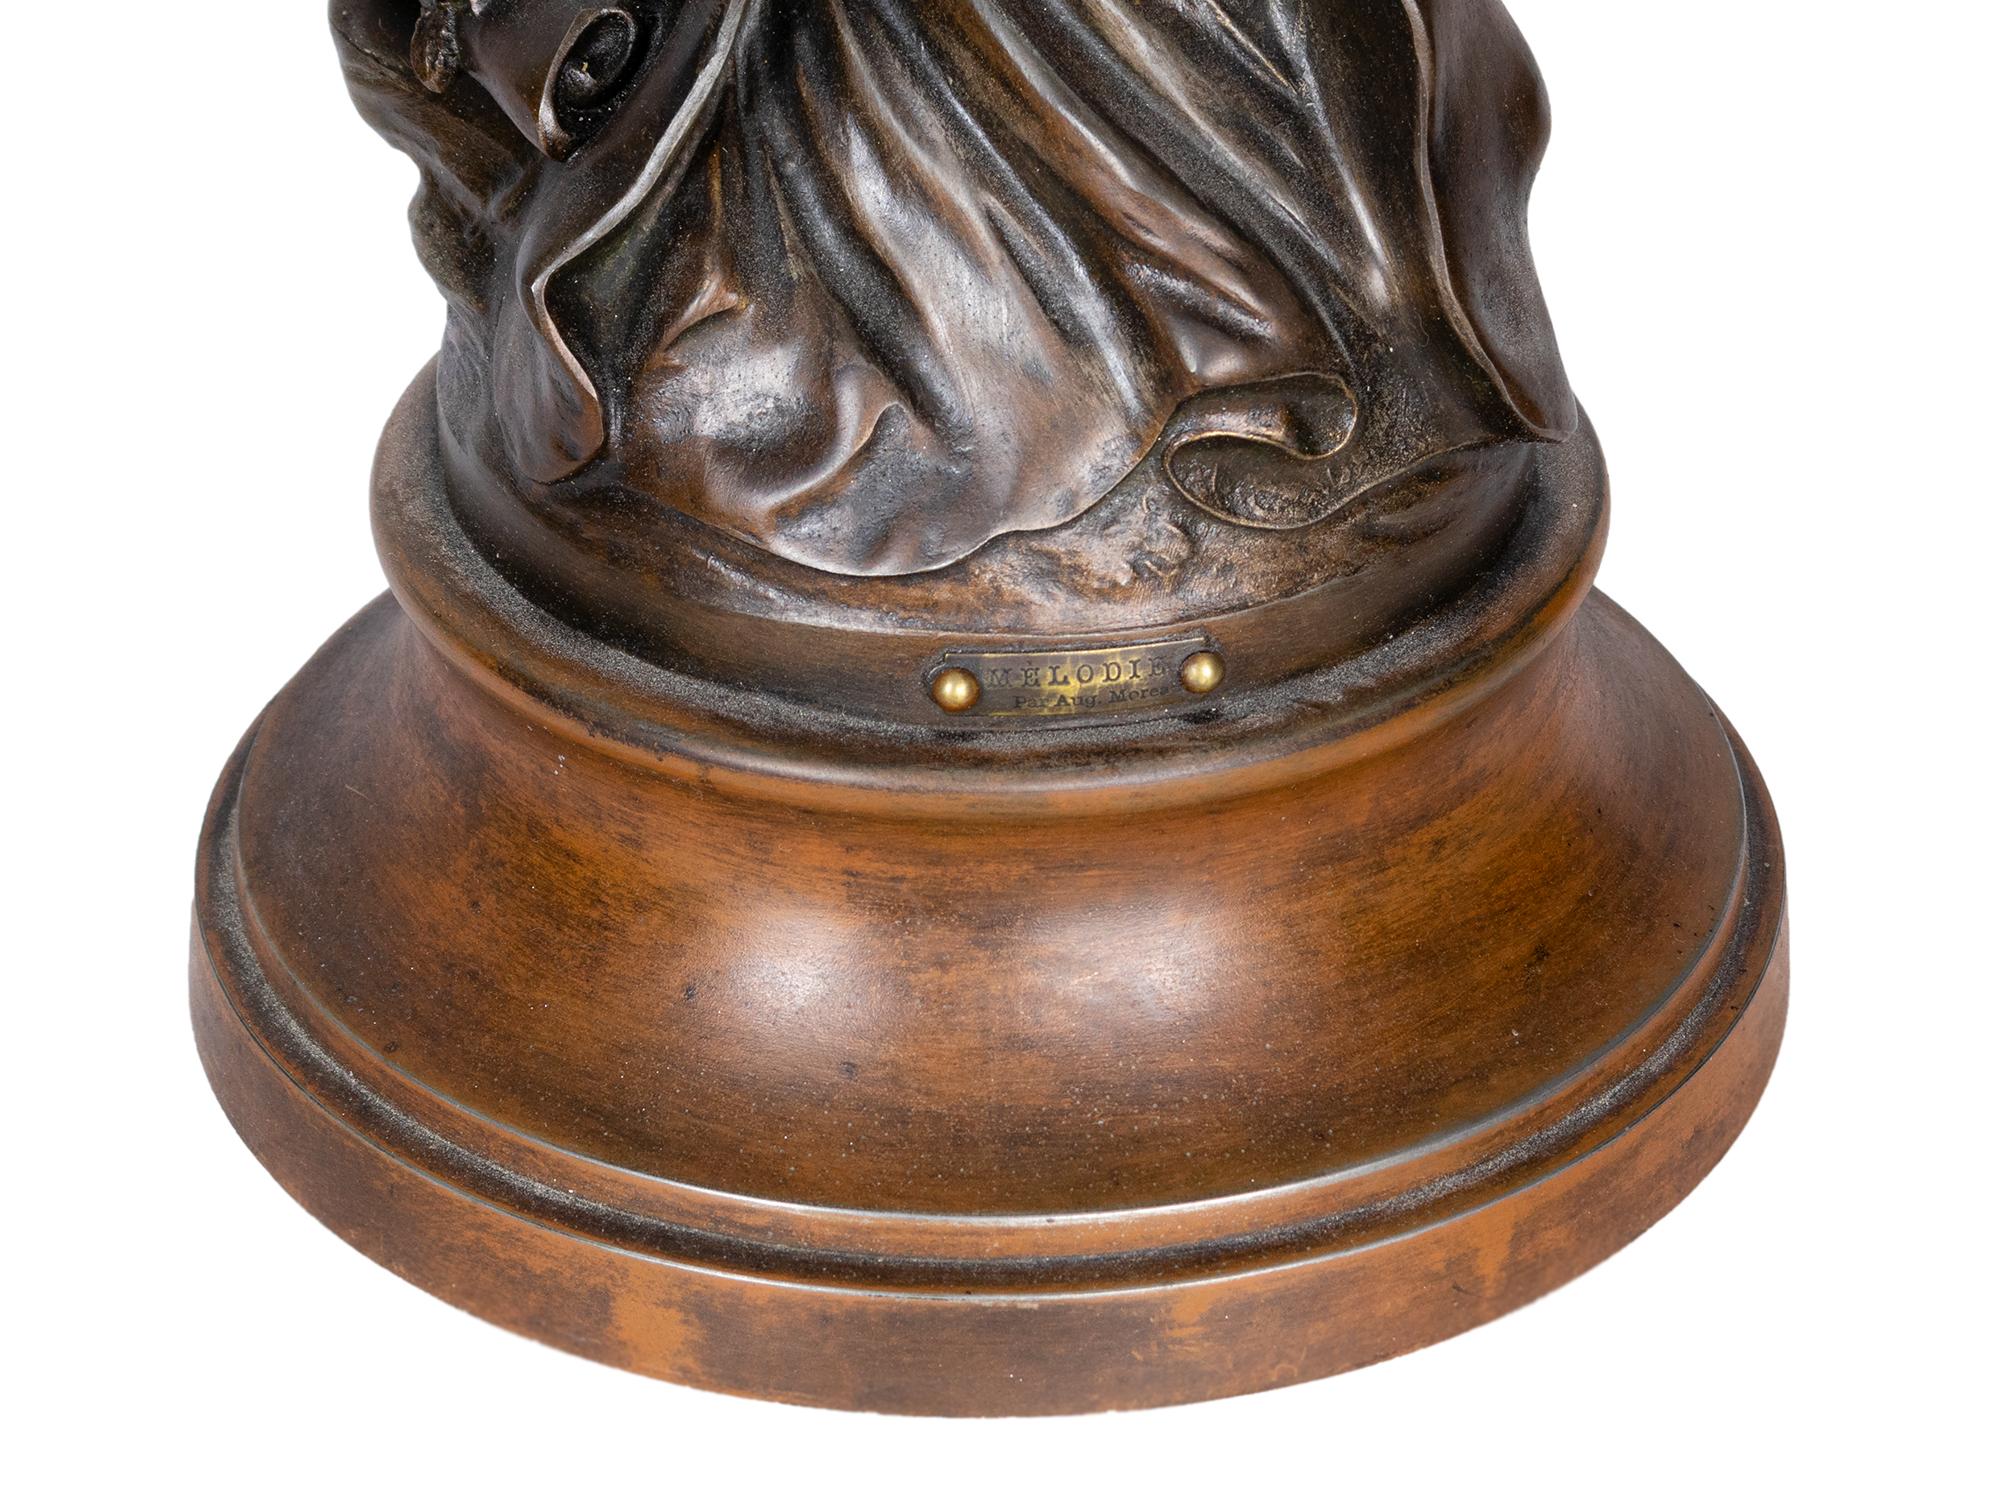 Metal Muse Calliope Statue by François Moreau Statue, 19th Century For Sale